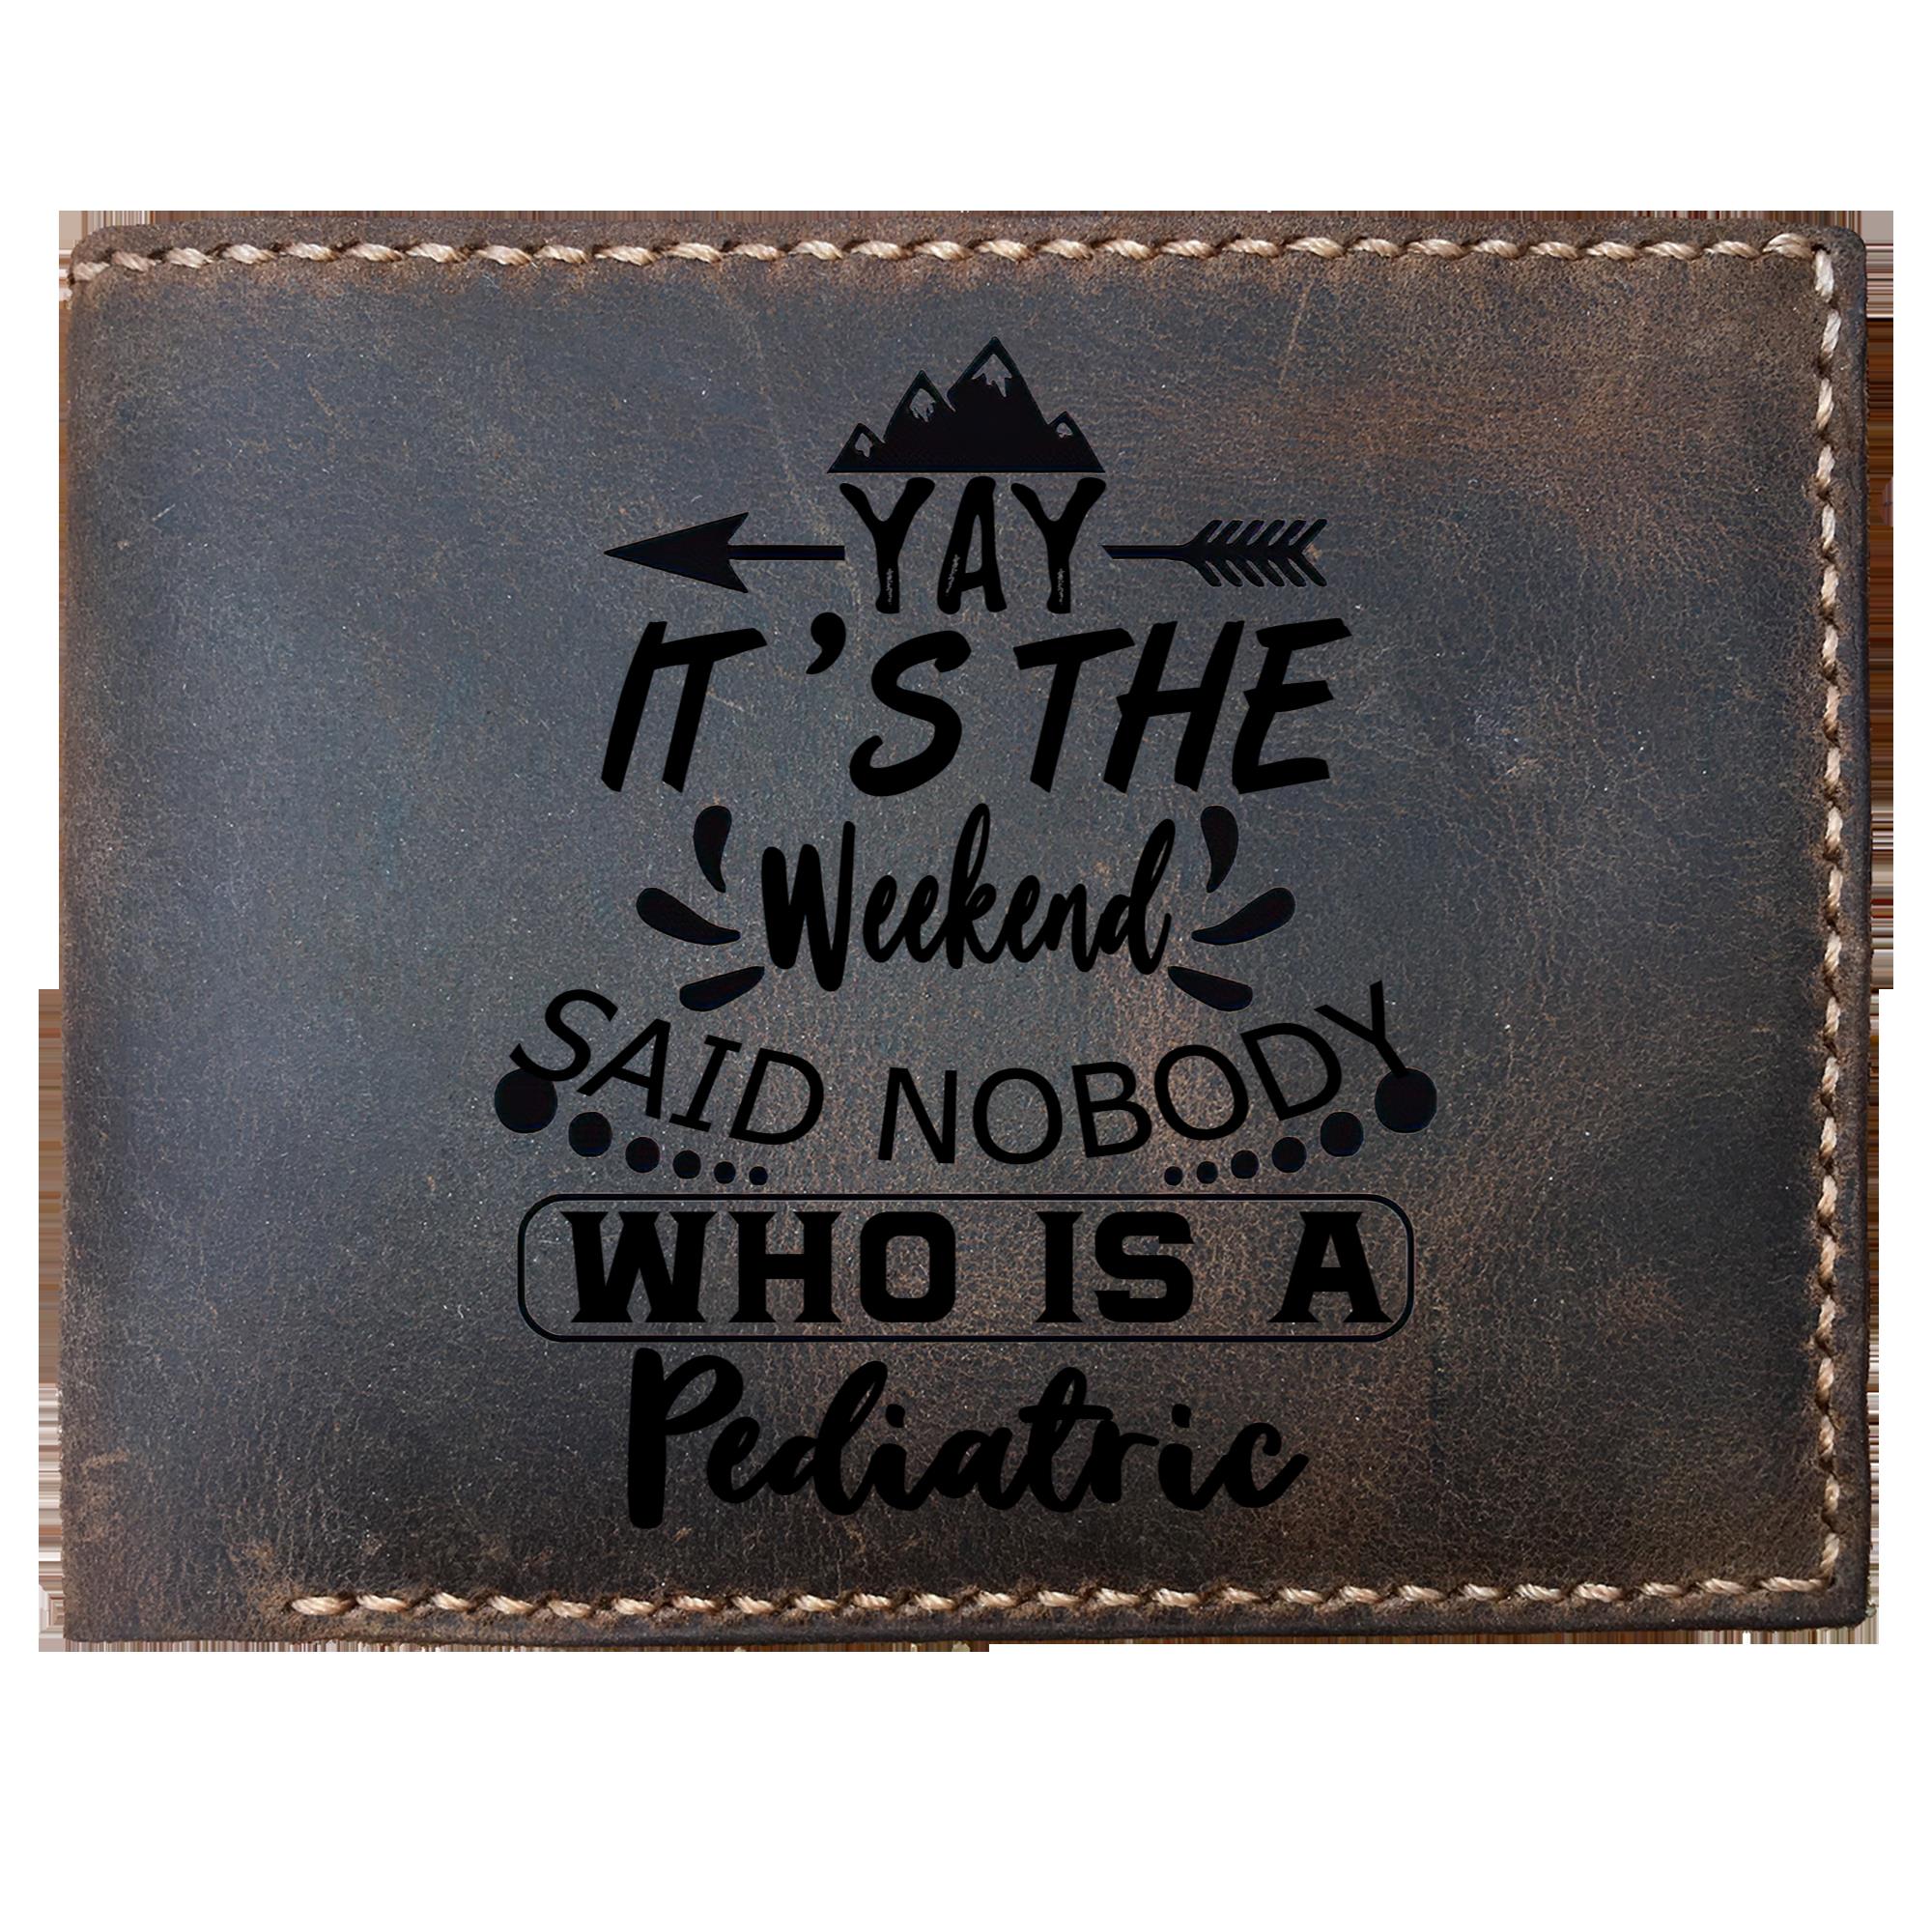 Skitongifts Funny Custom Laser Engraved Bifold Leather Wallet For Men, It's The Weekend Said Nobody Who Is A Pediatric, Father's Day Gifts